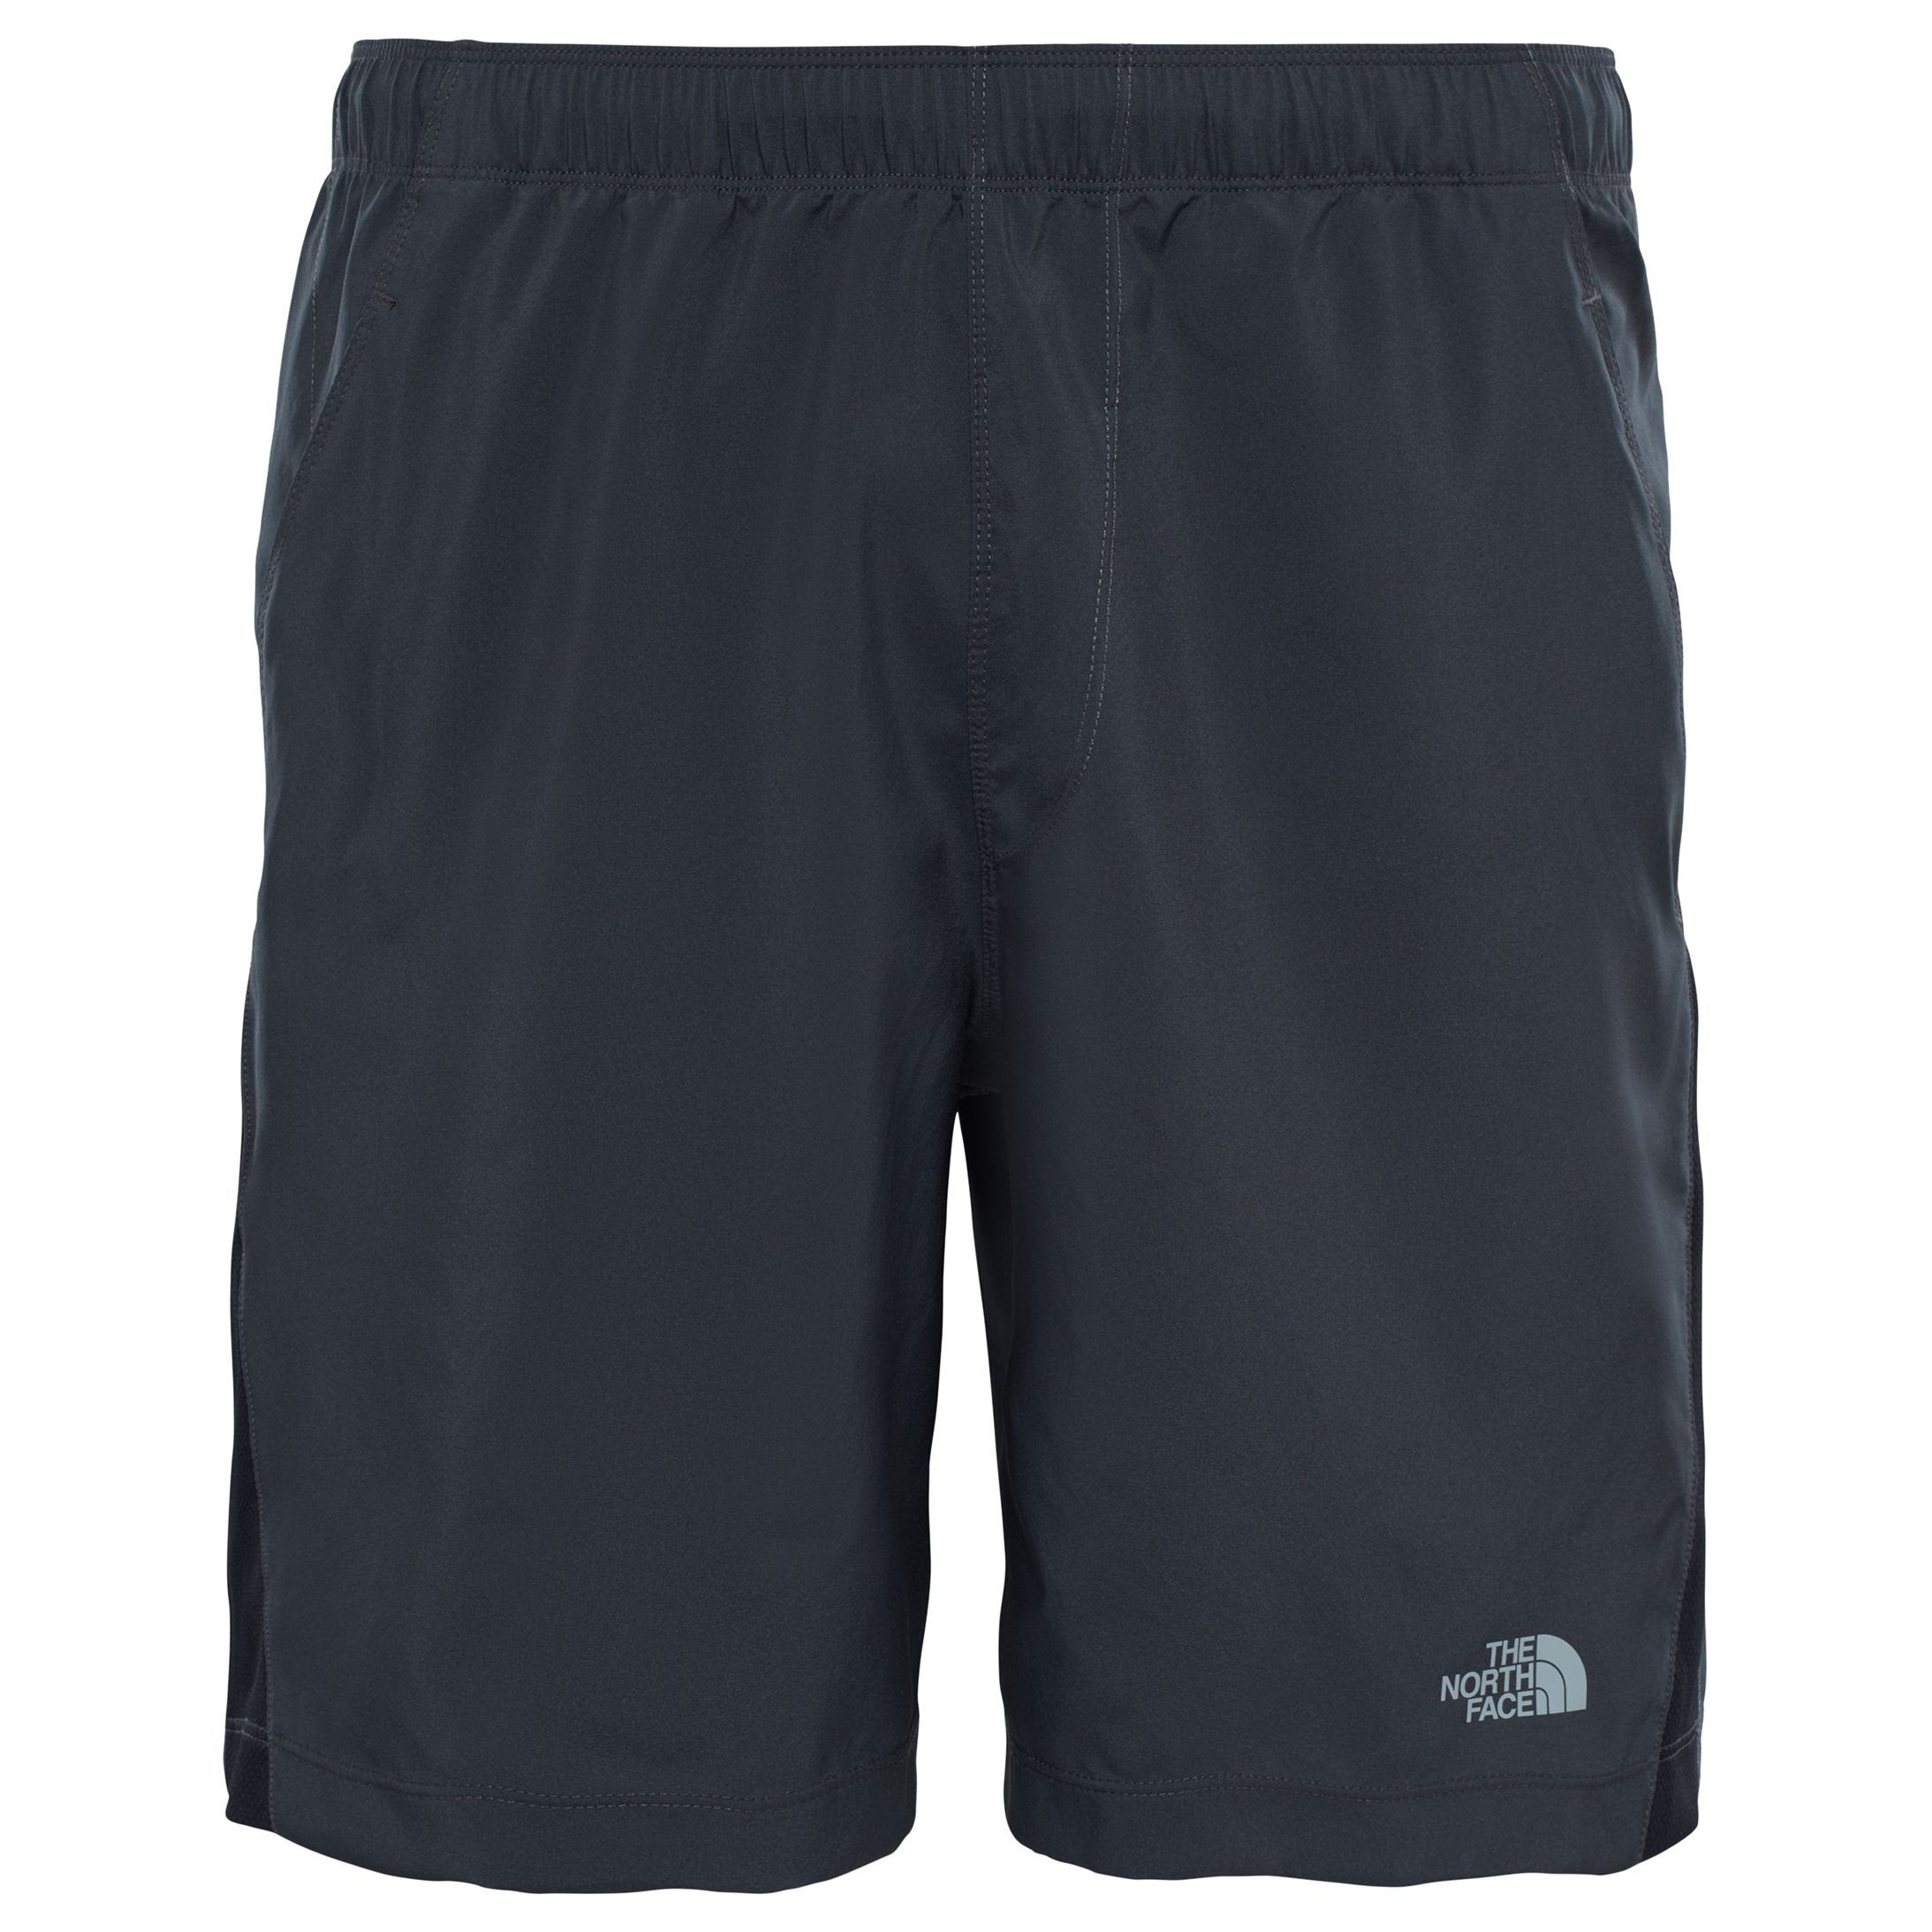 The North Face Reactor Shorts, Grey, S